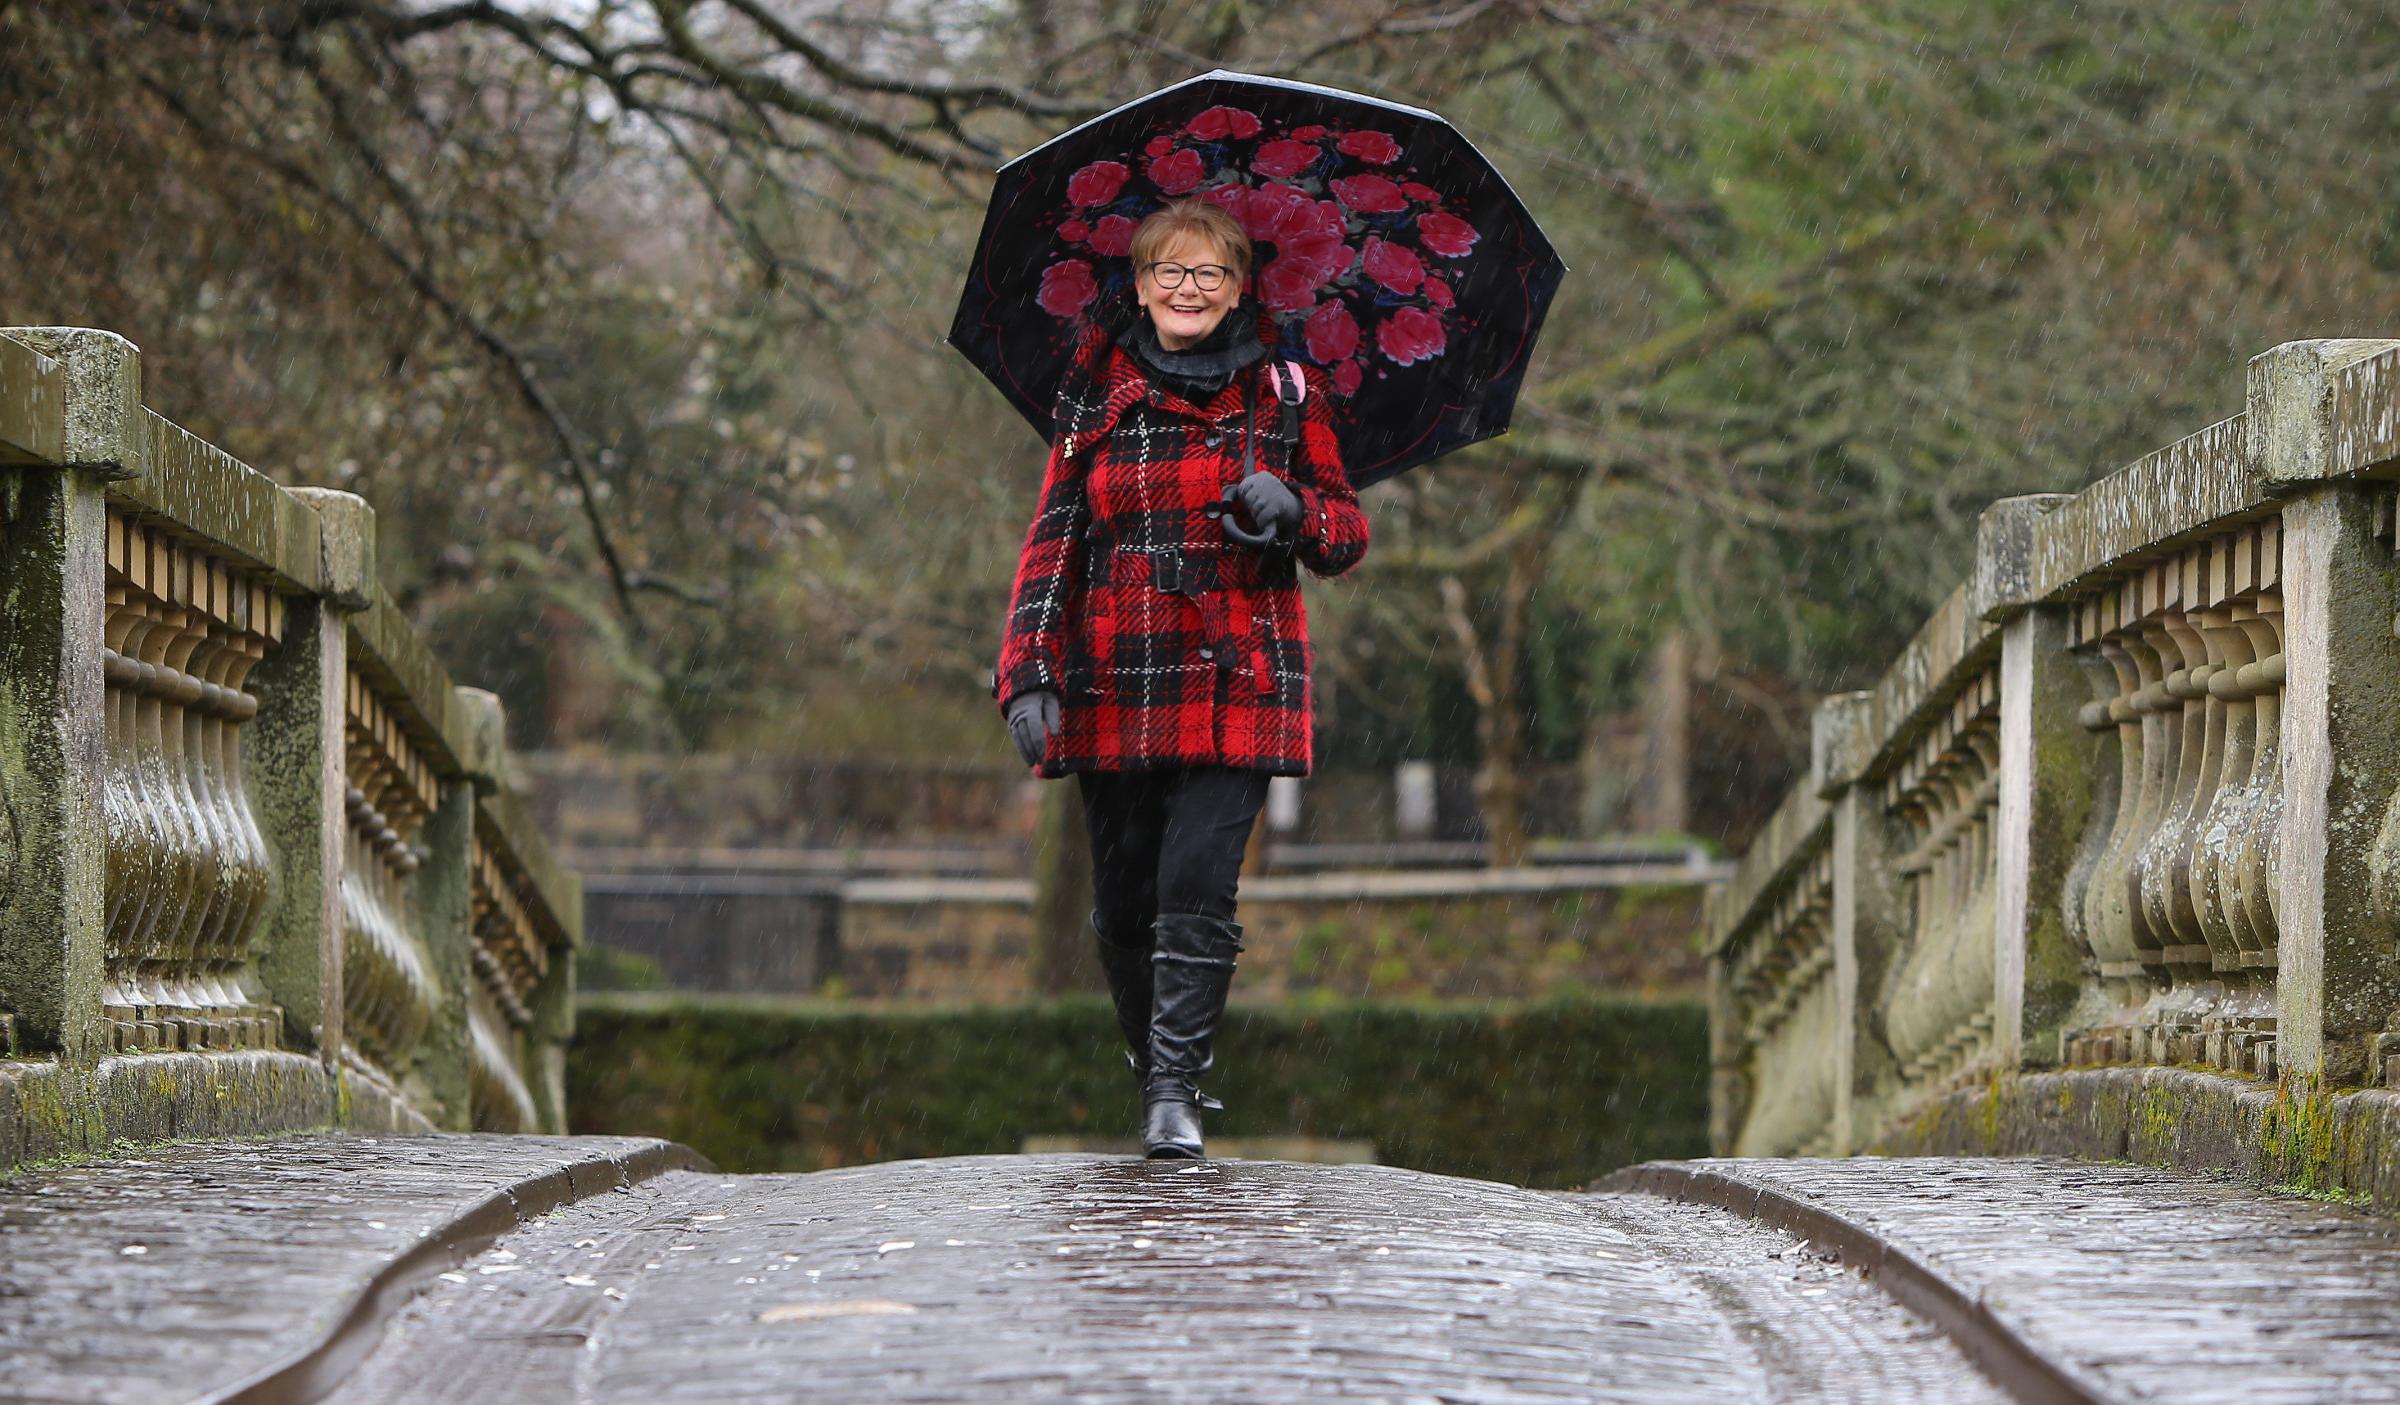 Mary Graham pictured in Pollok Country Park, Glasgow. Mary is doing 280,000 steps in February to raise money for The Heralds memorial garden campaign. Photograph by Colin Mearns.